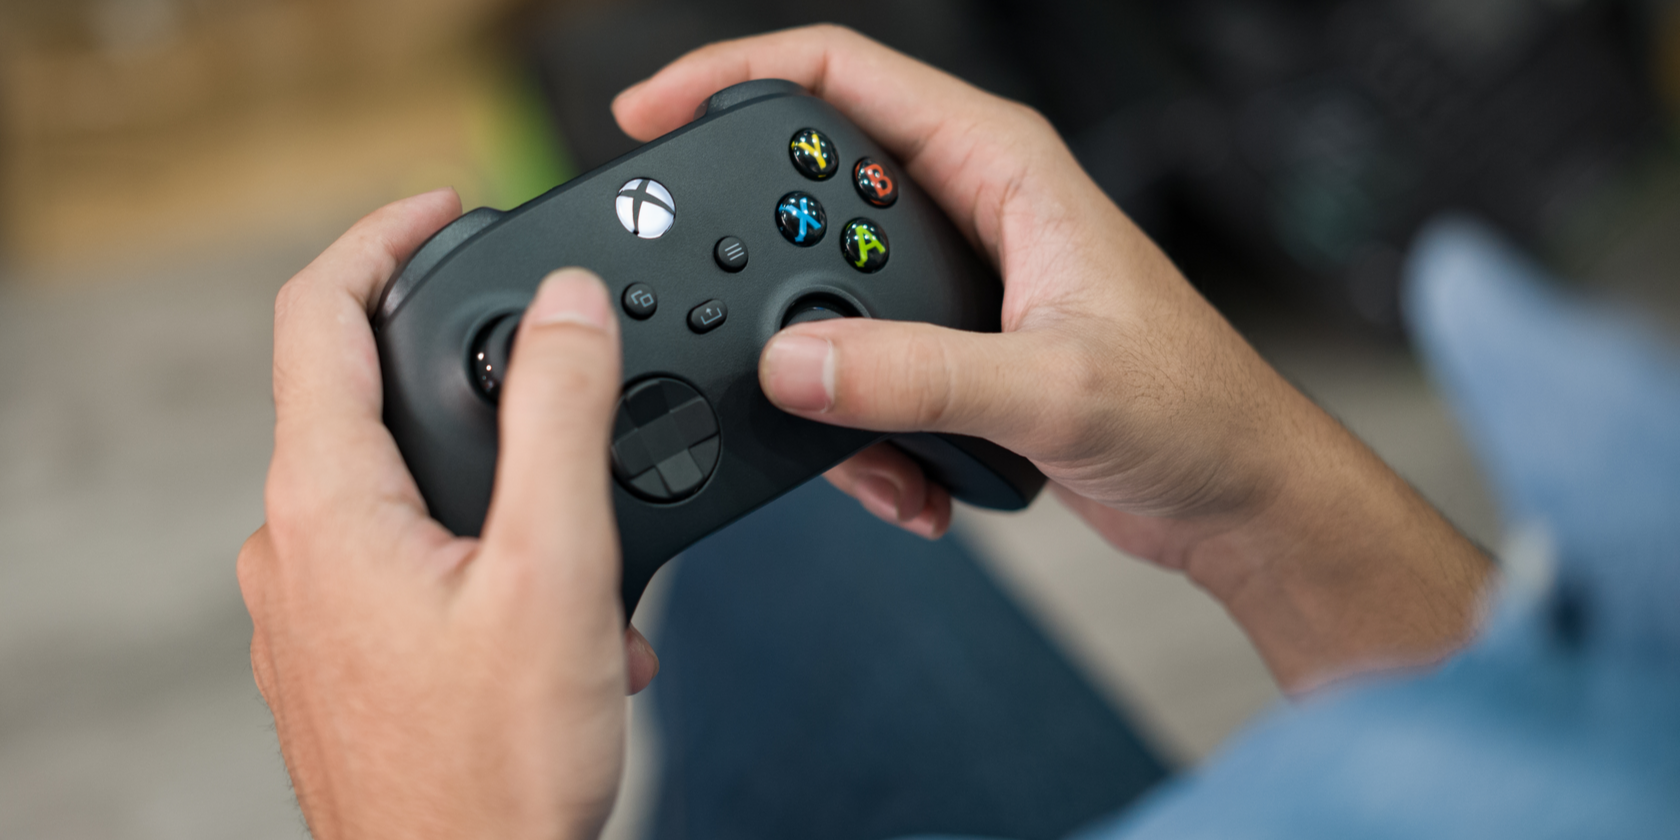 Xbox Series X Controller in a man's hands